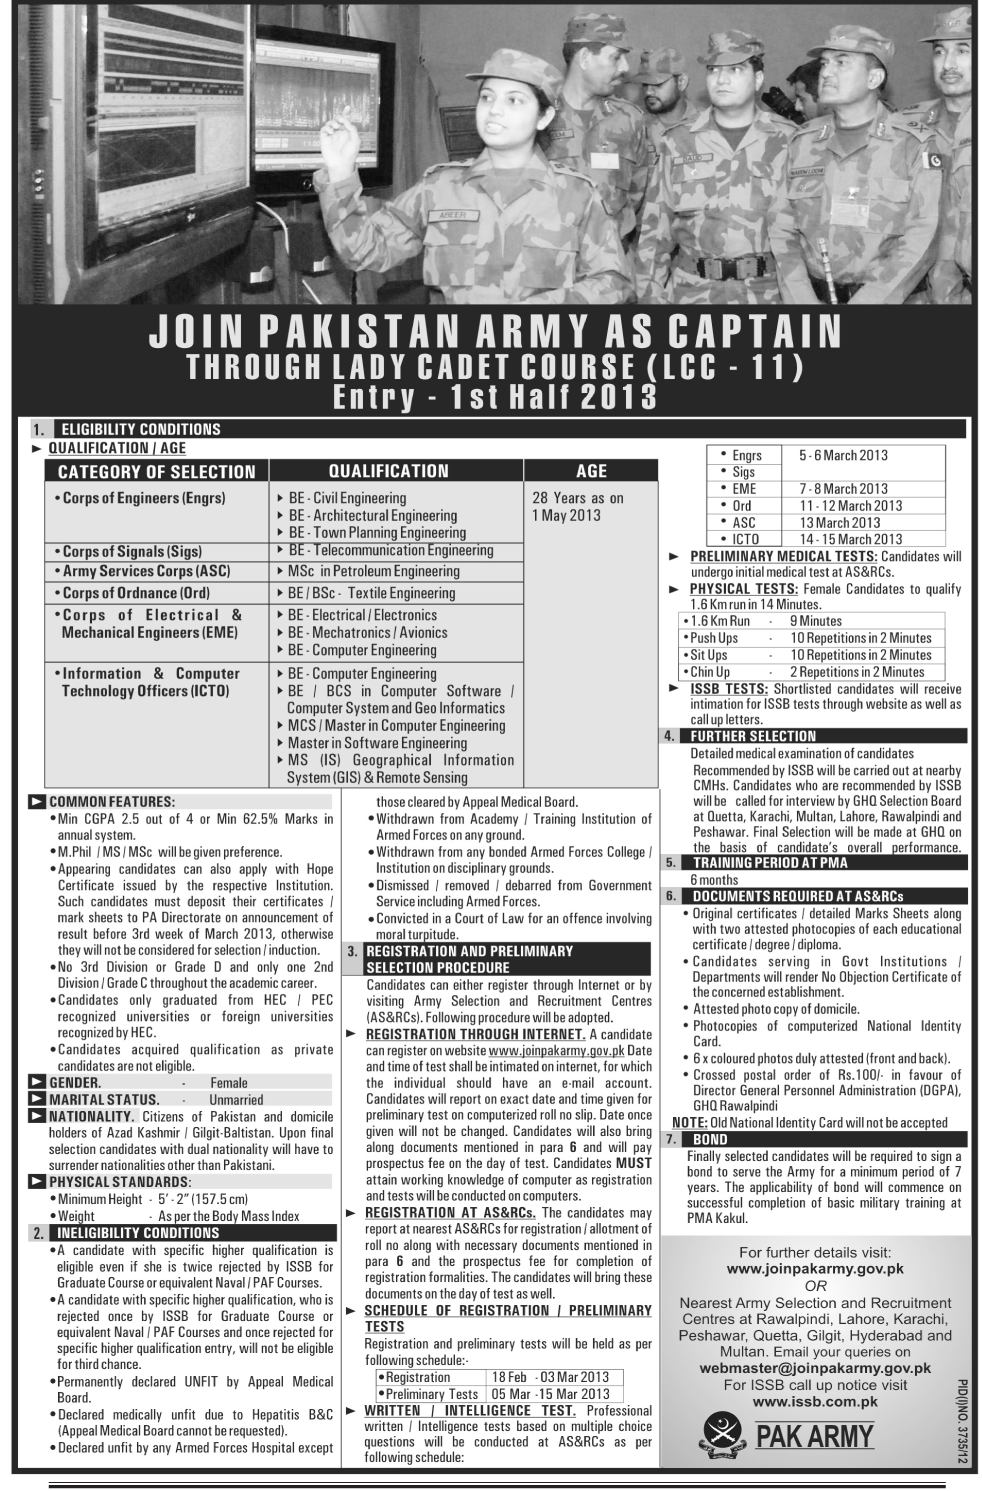 Join Pakistan Army through Lady Cadet Course as Captain 2013 (LCC-11)